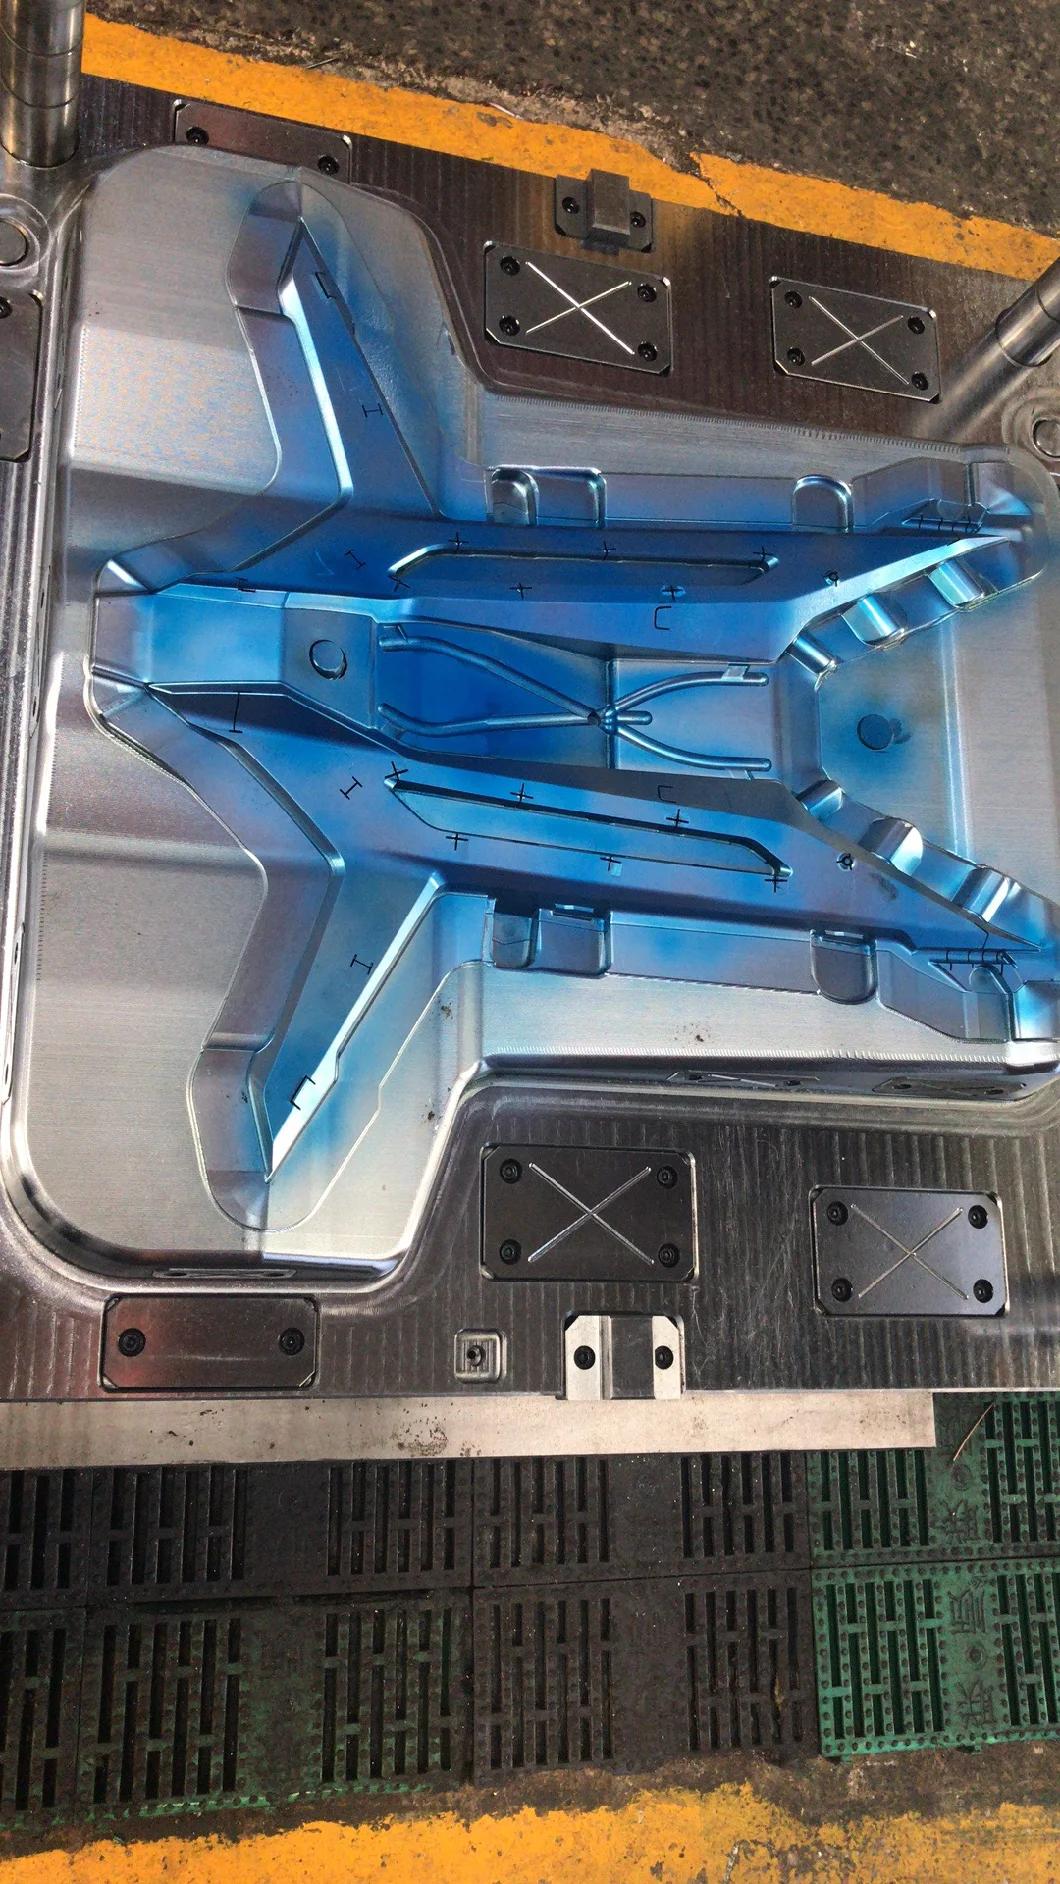 Injection Plastic Moulding